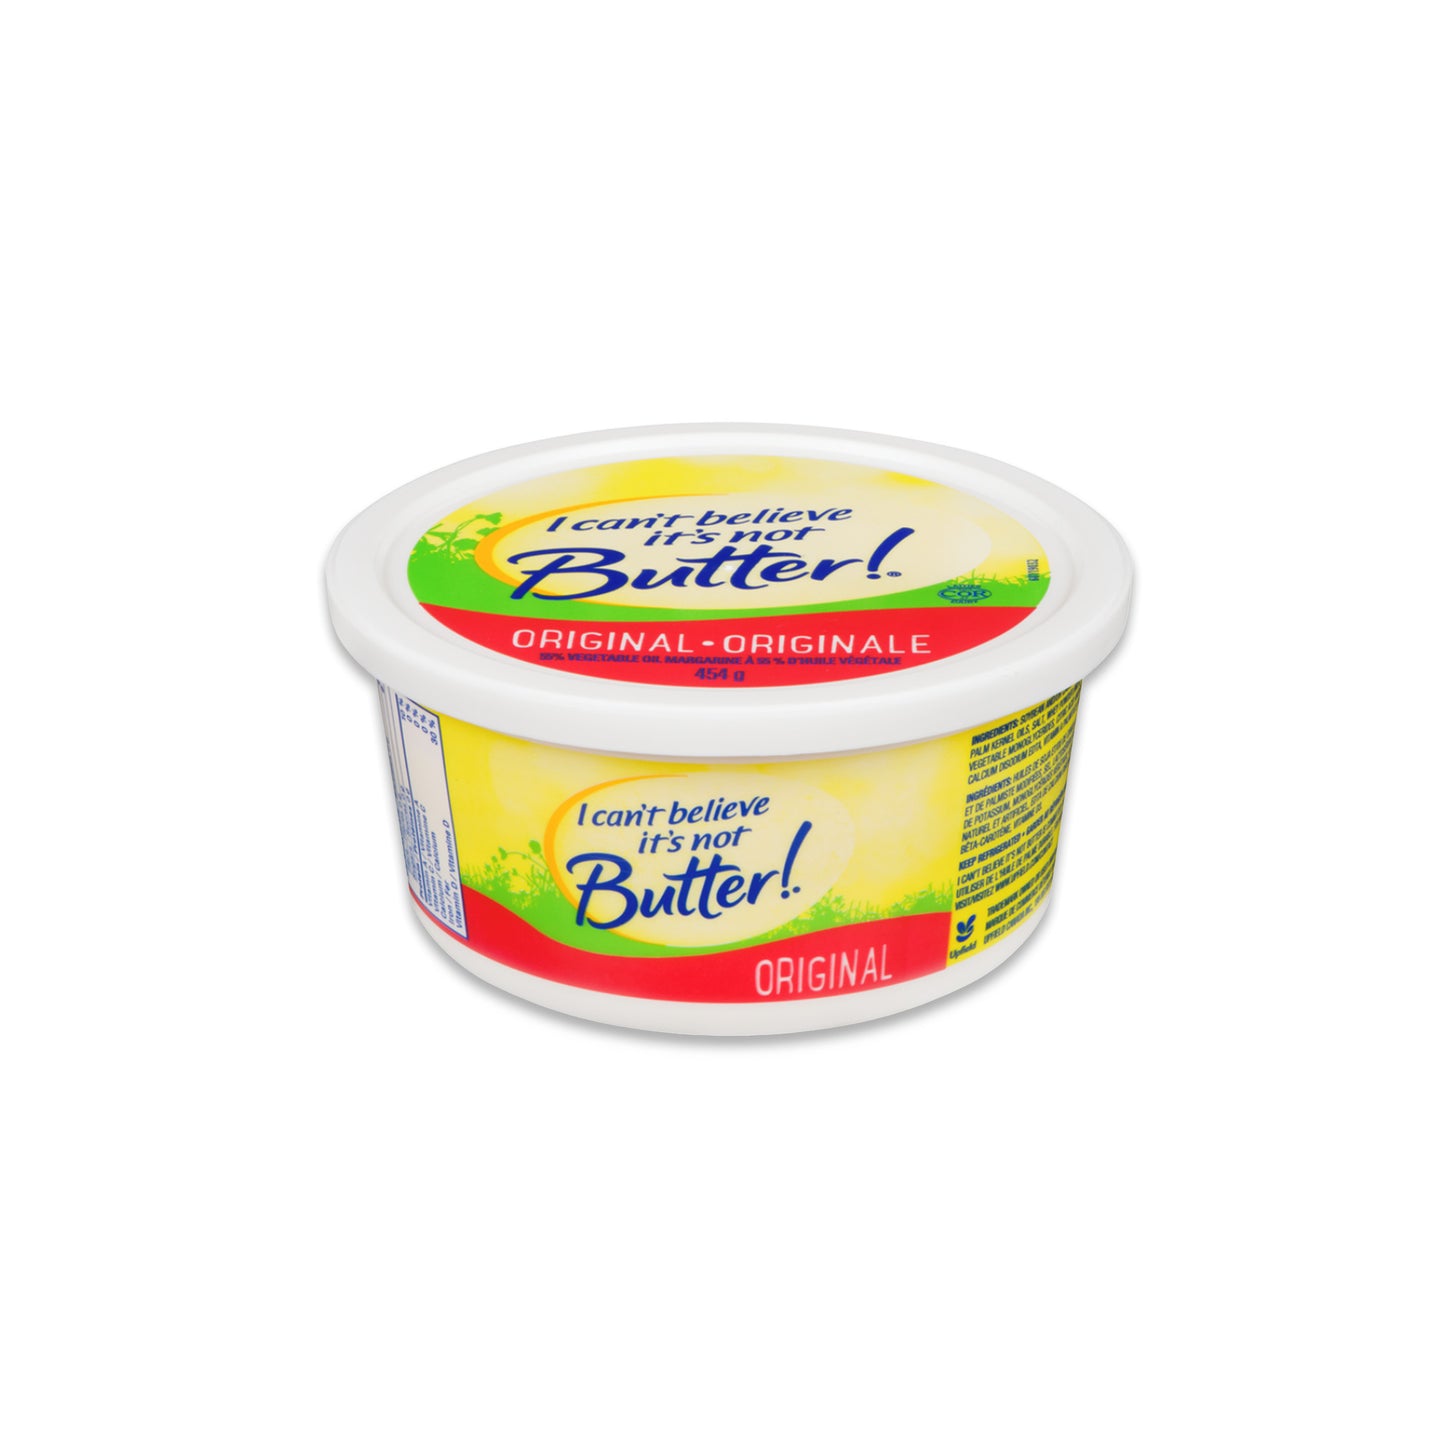 Margarine - I Can't Believe It's Not Butter!